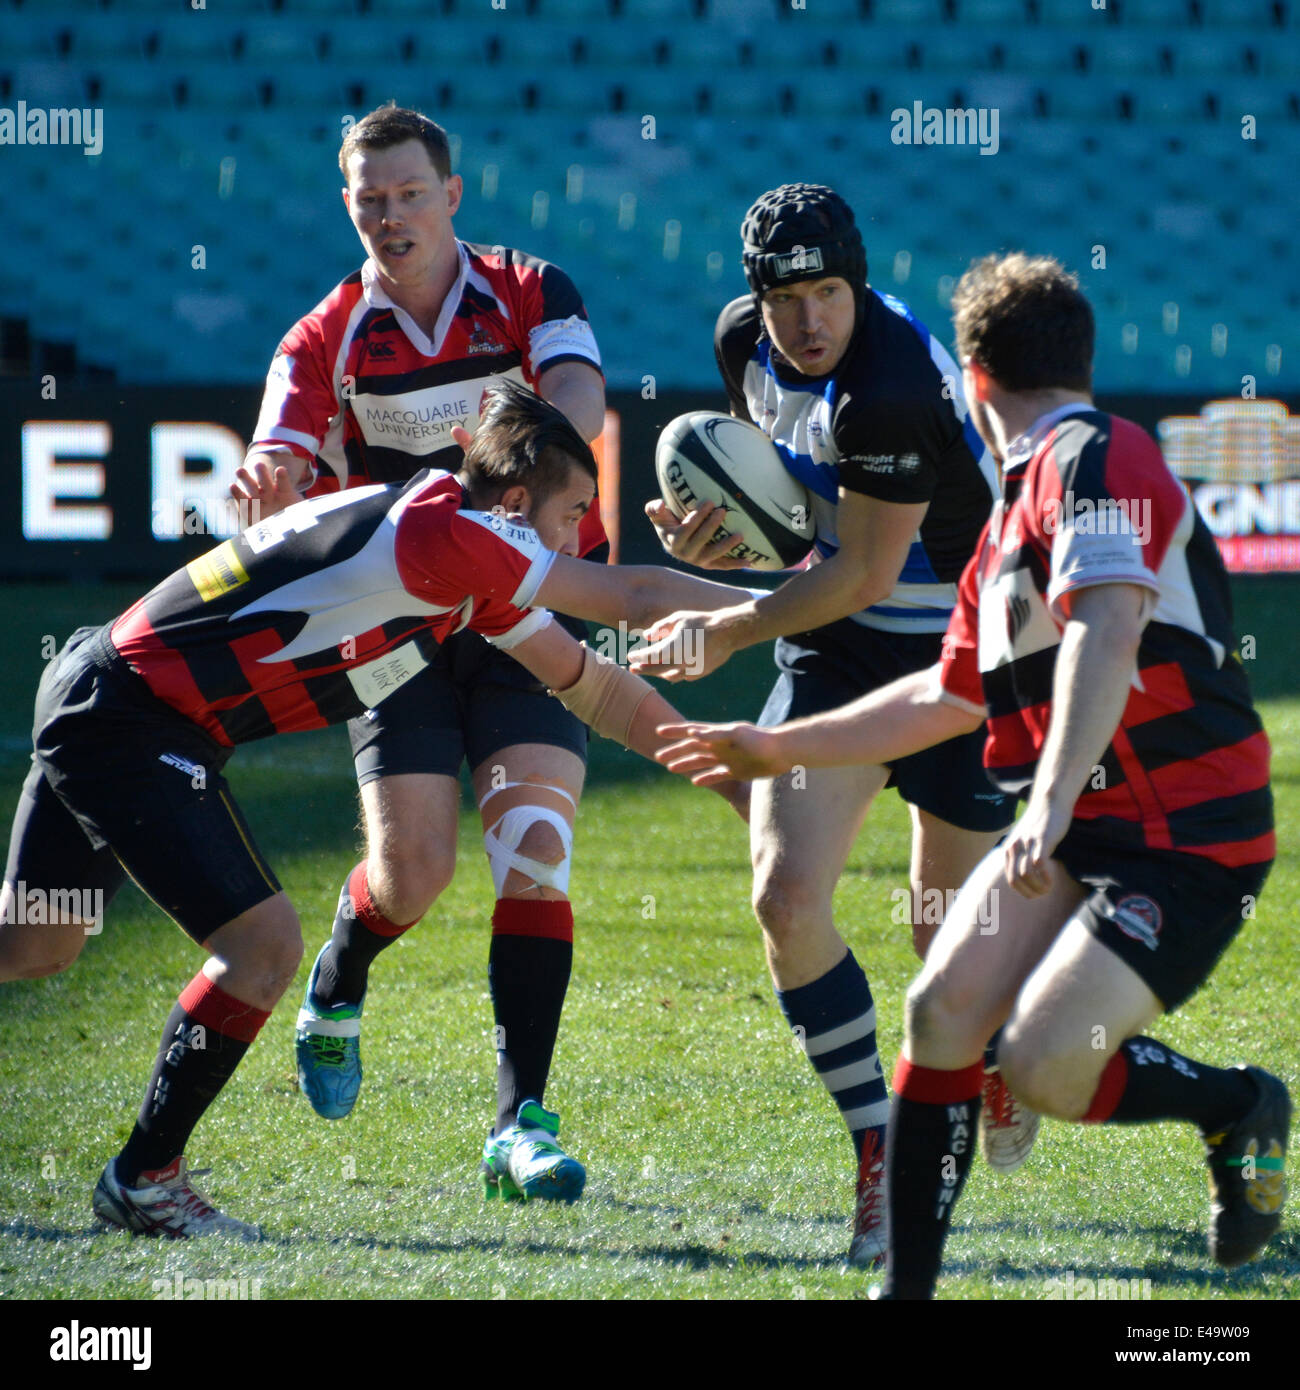 Sydney, Australia. 6th July, 2014. Macquarie University players attempt a tackle on Sydney Convicts forward during historic match against Macquarie University at the Allianz Stadium. Credit:  MediaServicesAP/Alamy Live News Stock Photo